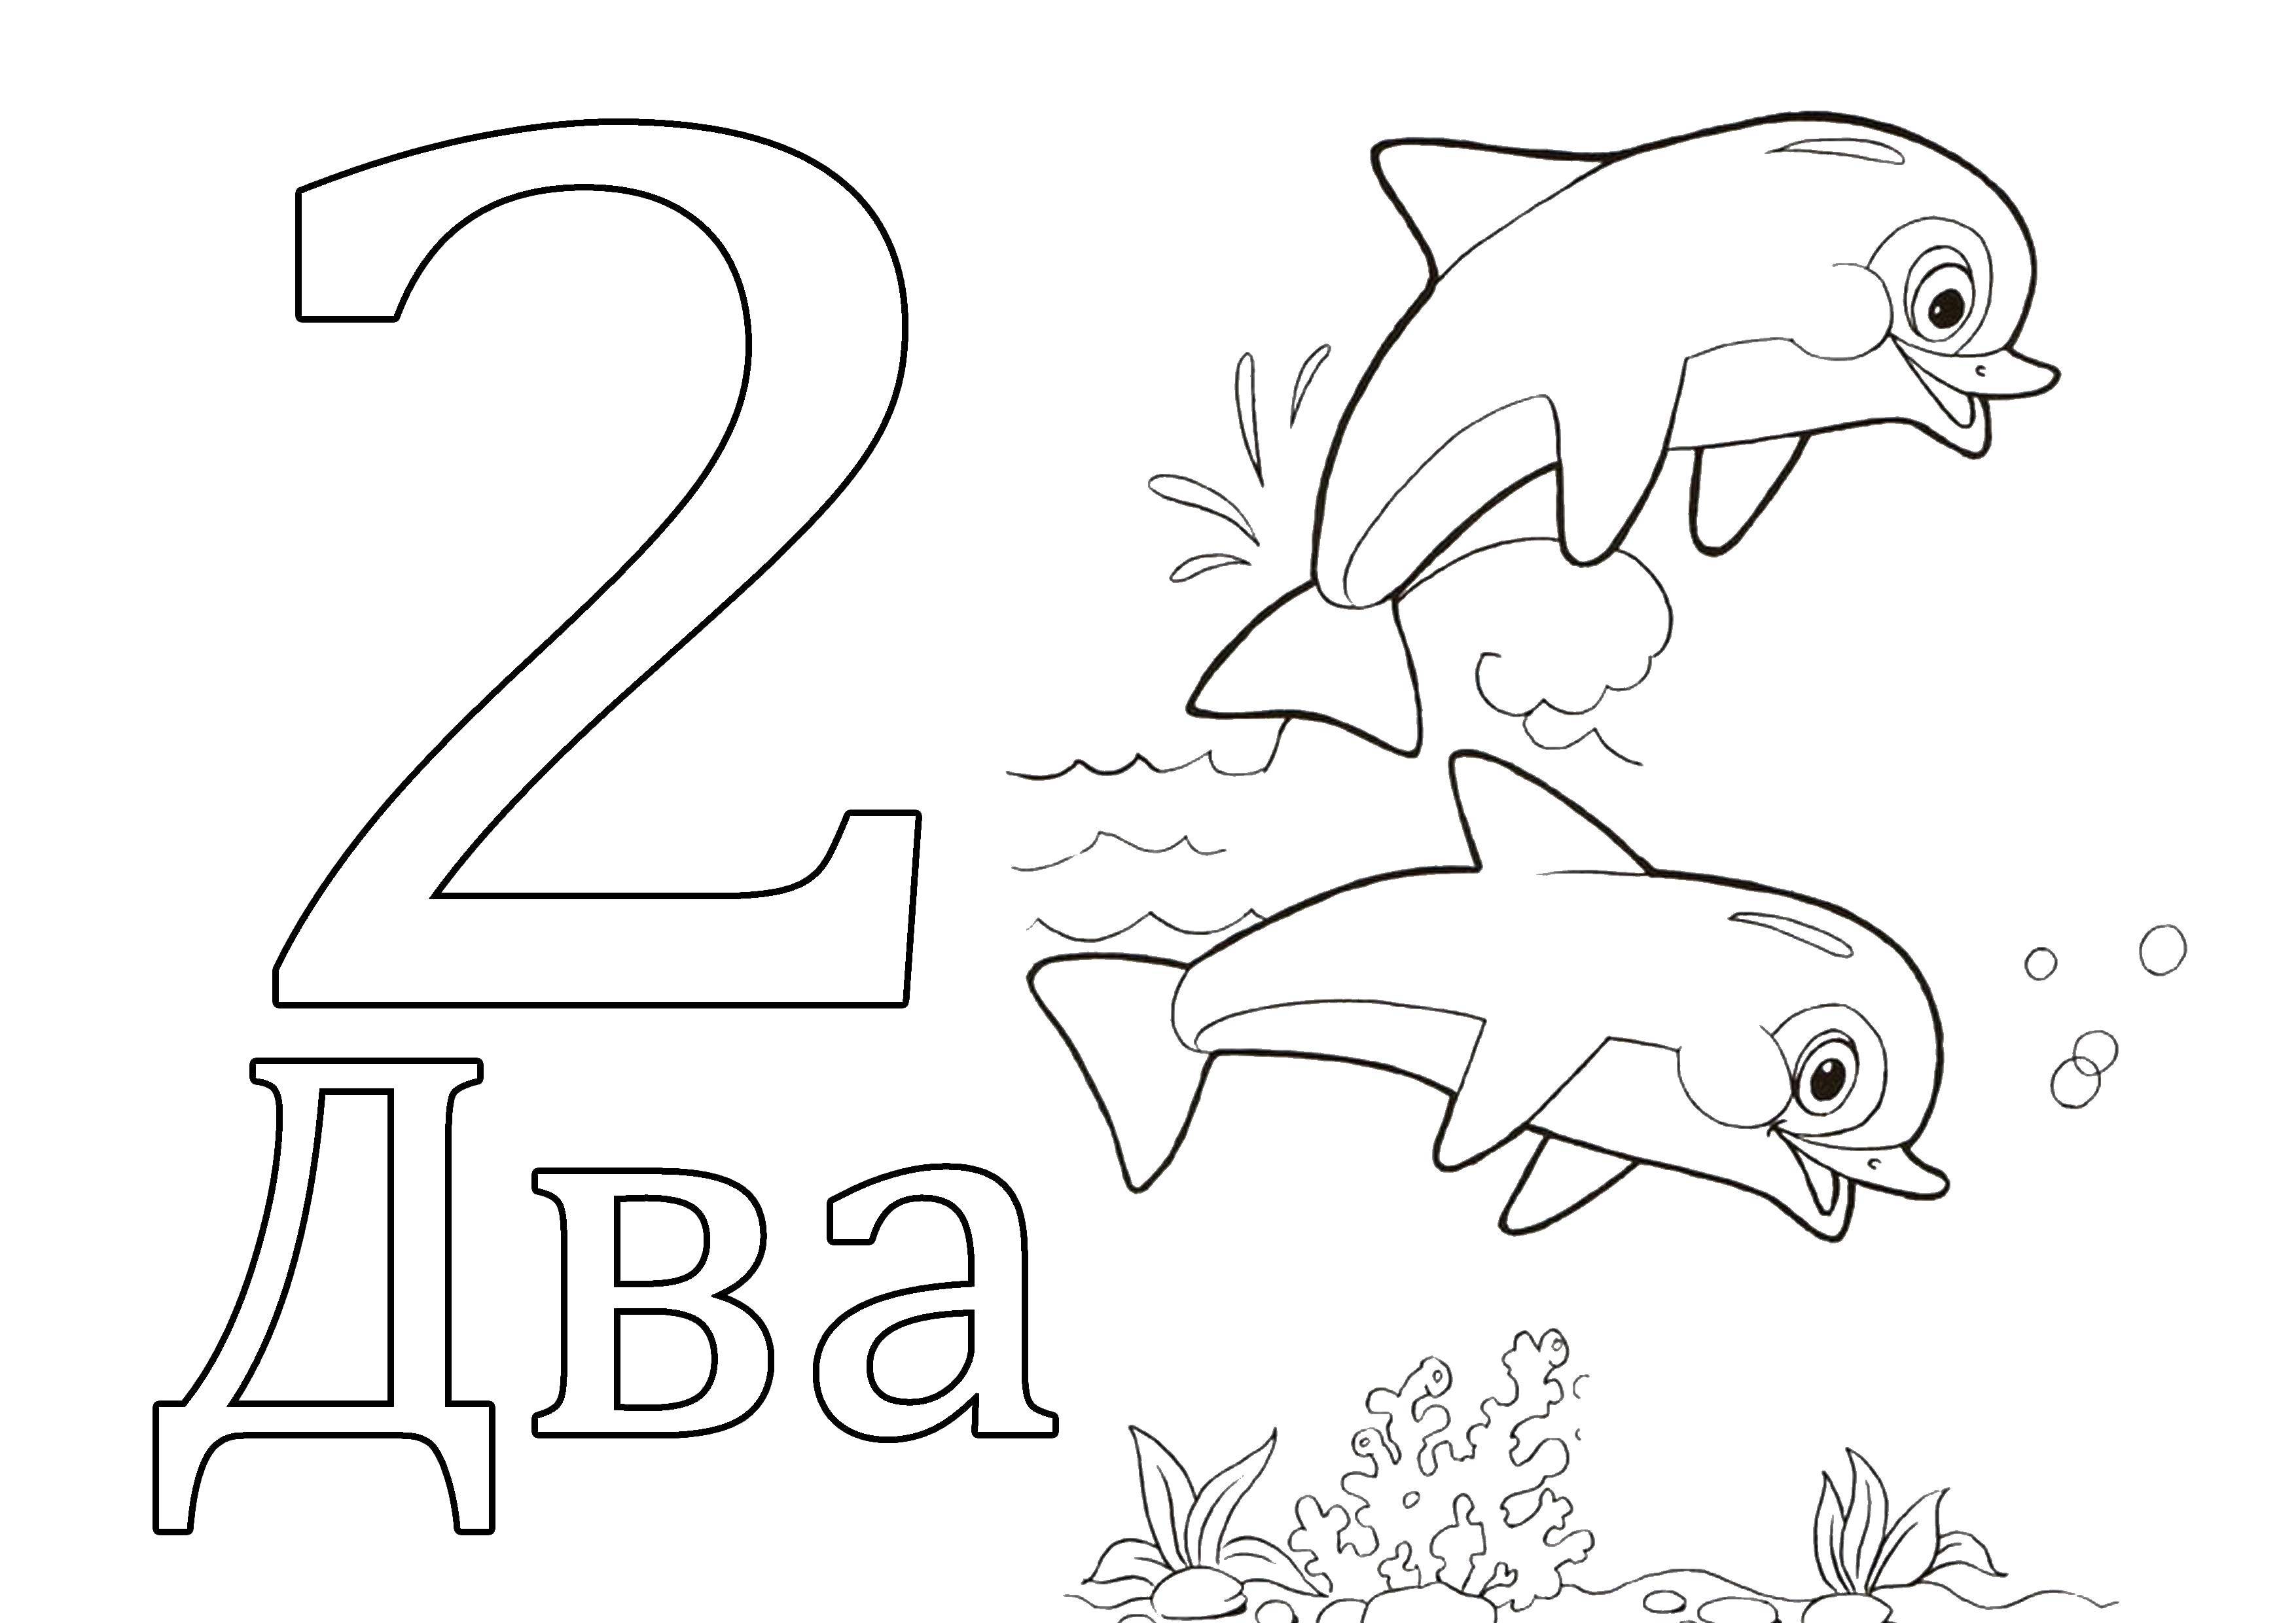 Coloring Two dolphins. Category mathematical coloring pages. Tags:  dolphins figures.